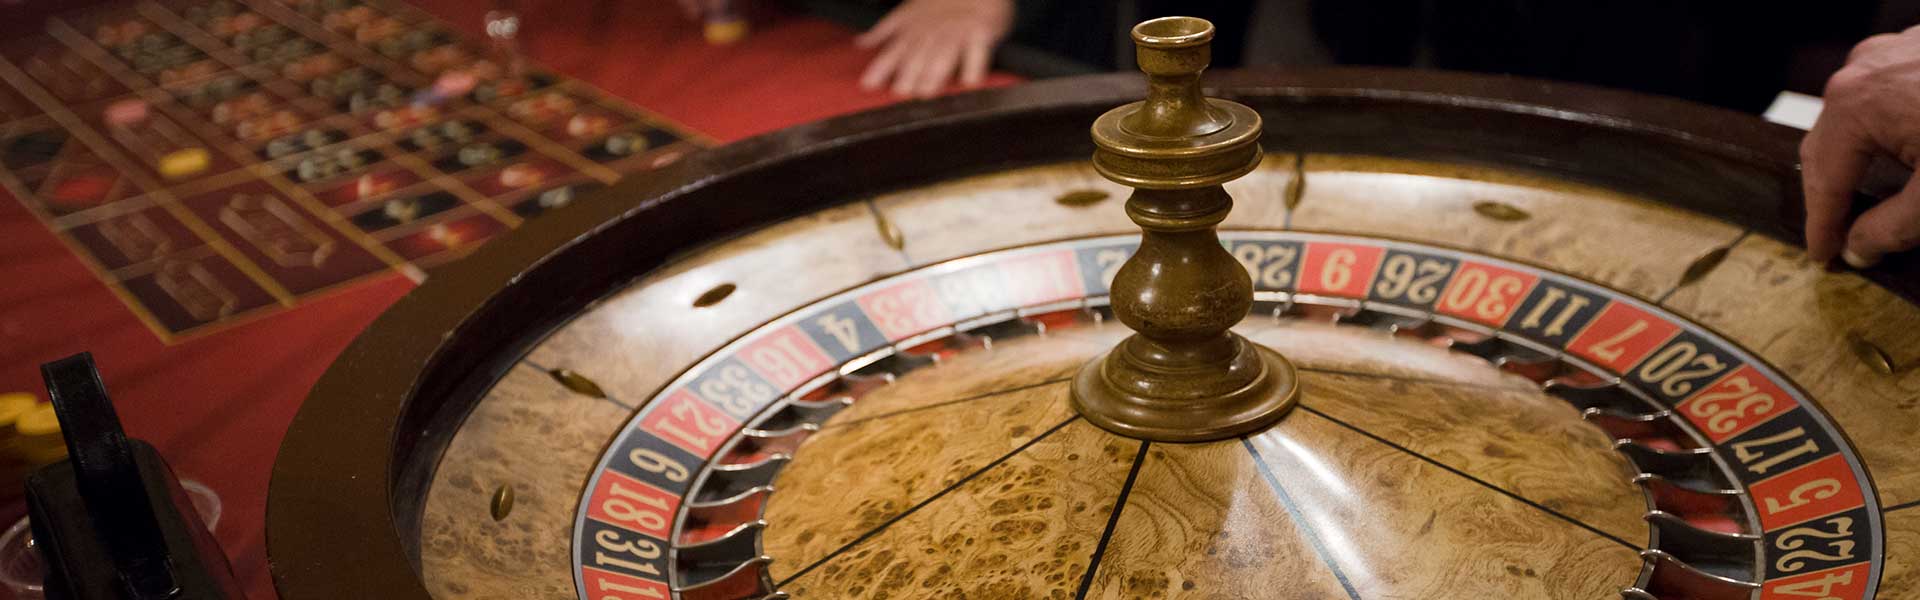 Casino Night at DuPage County Historical Museum